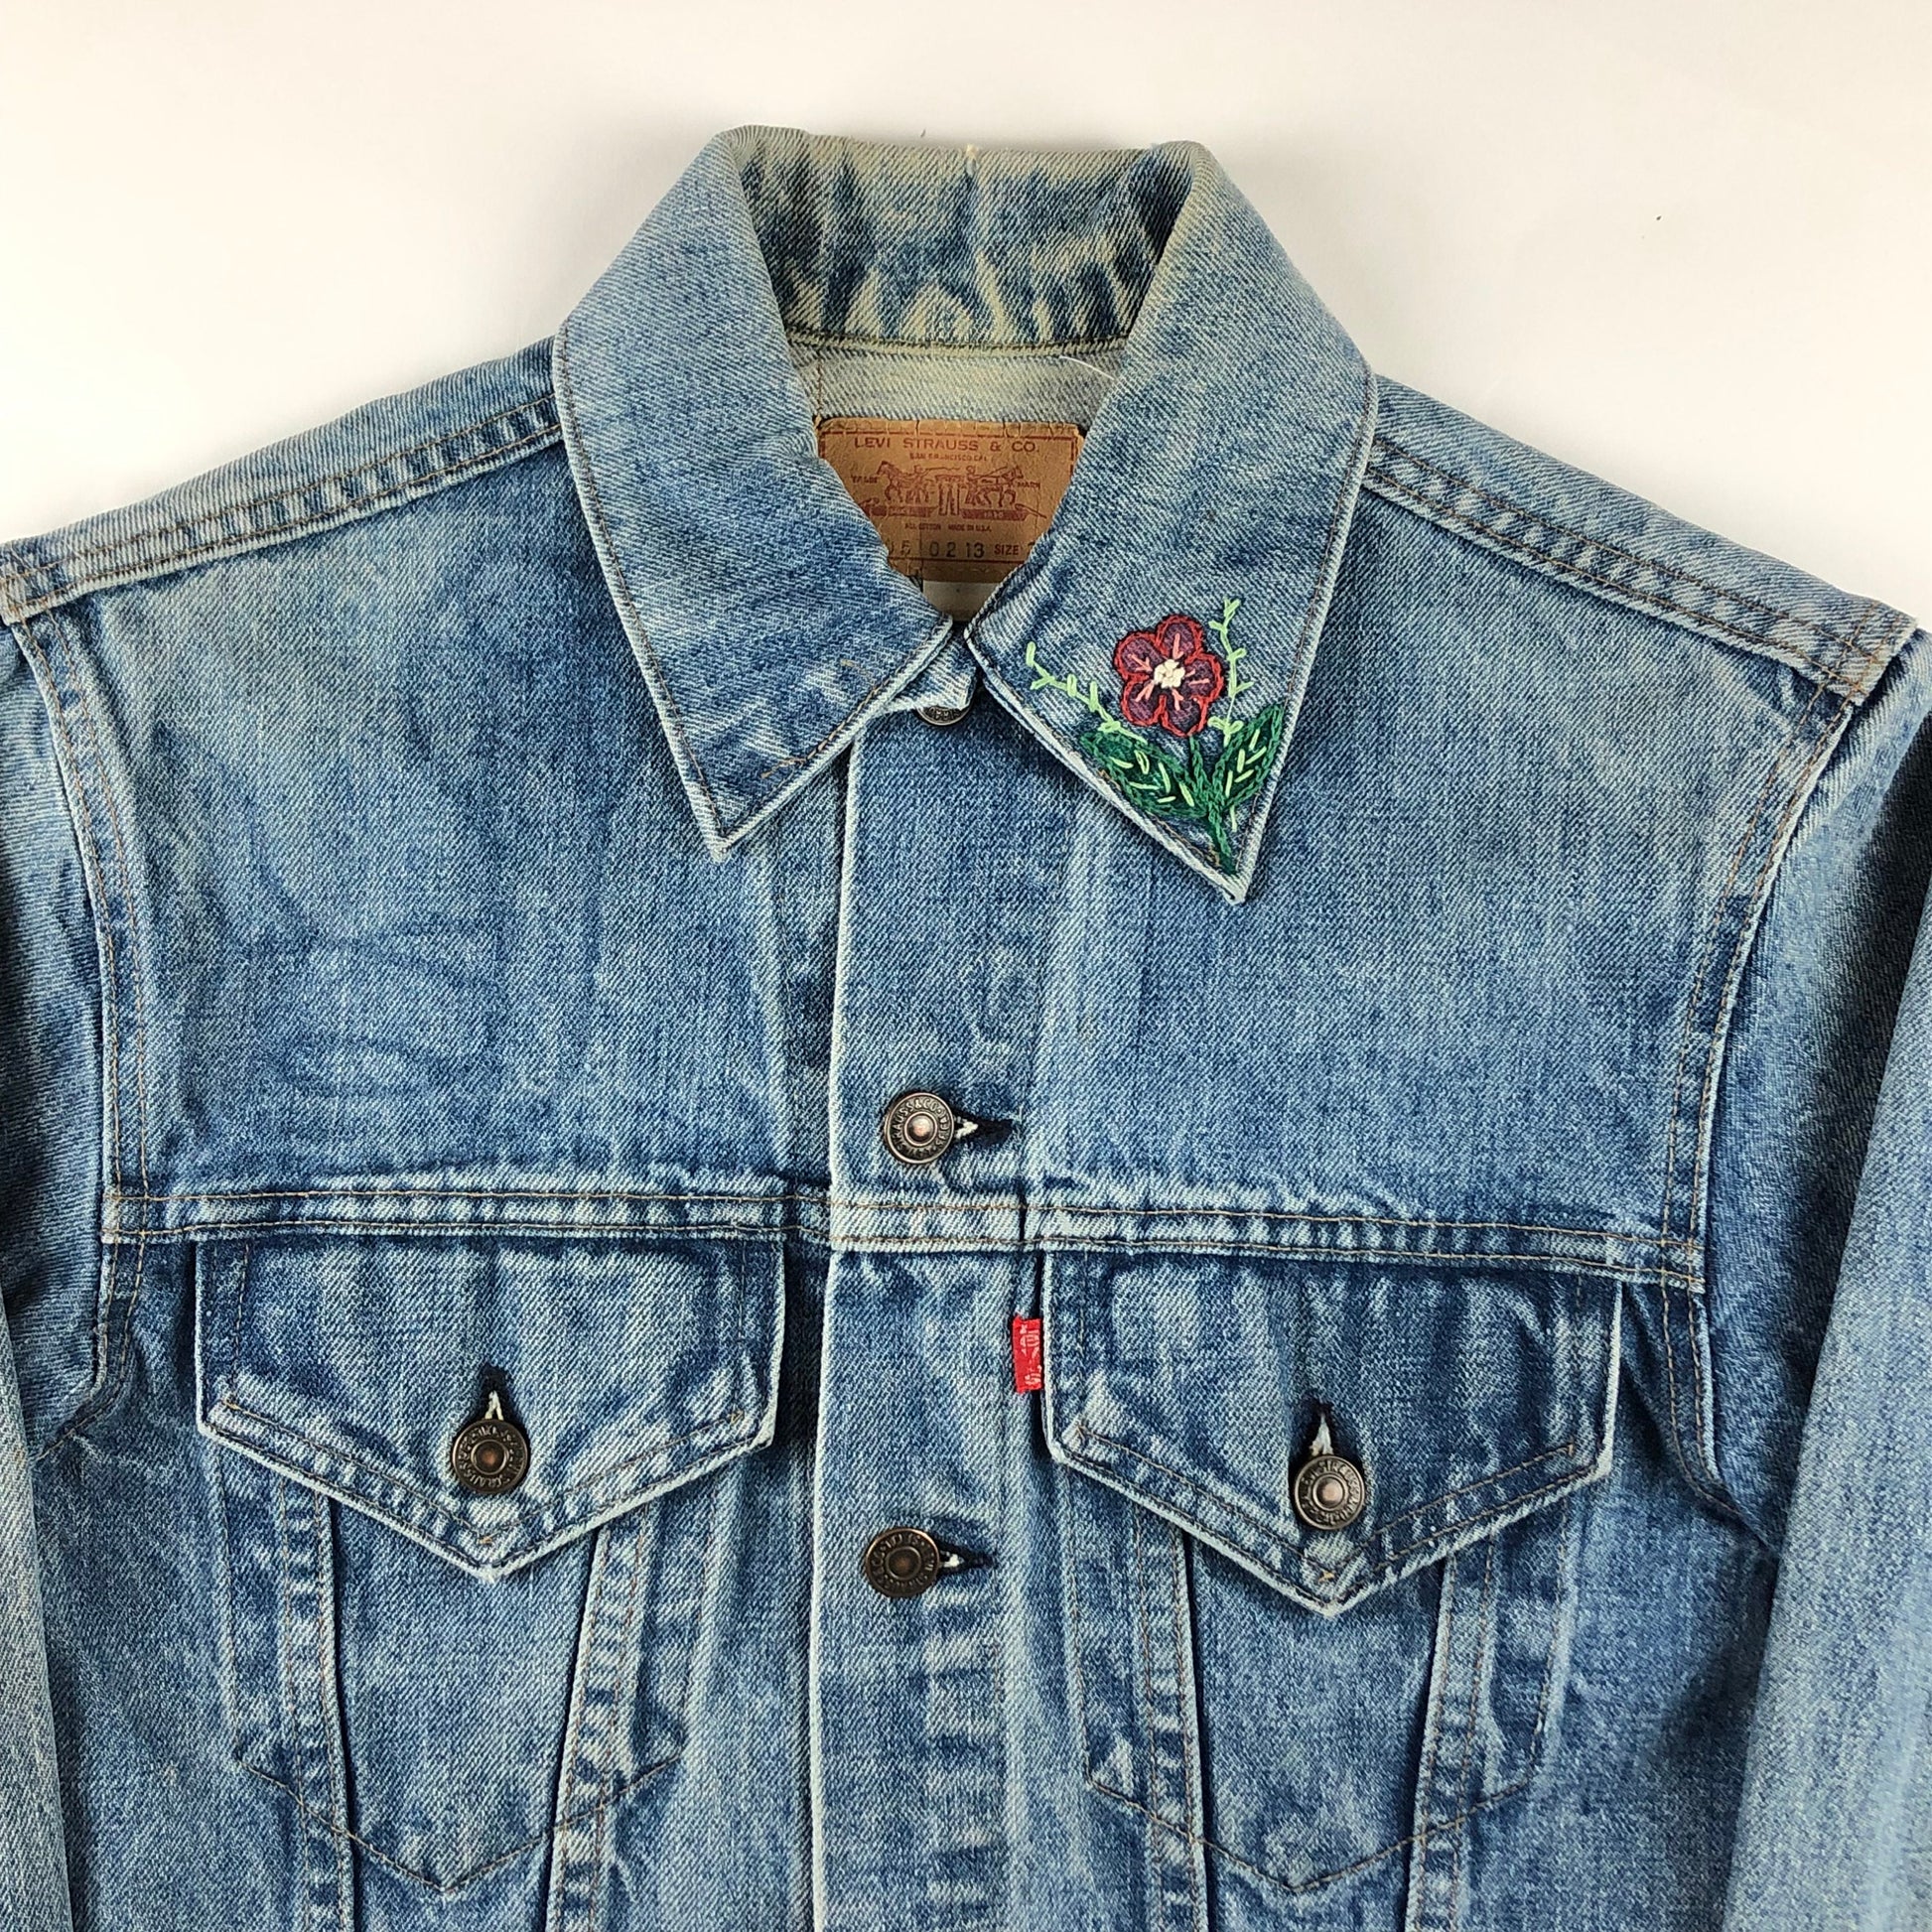 1970s Embroidered Levi's Two Pocket Type 3 Denim Trucker Jacket Made in USA Size XS/S